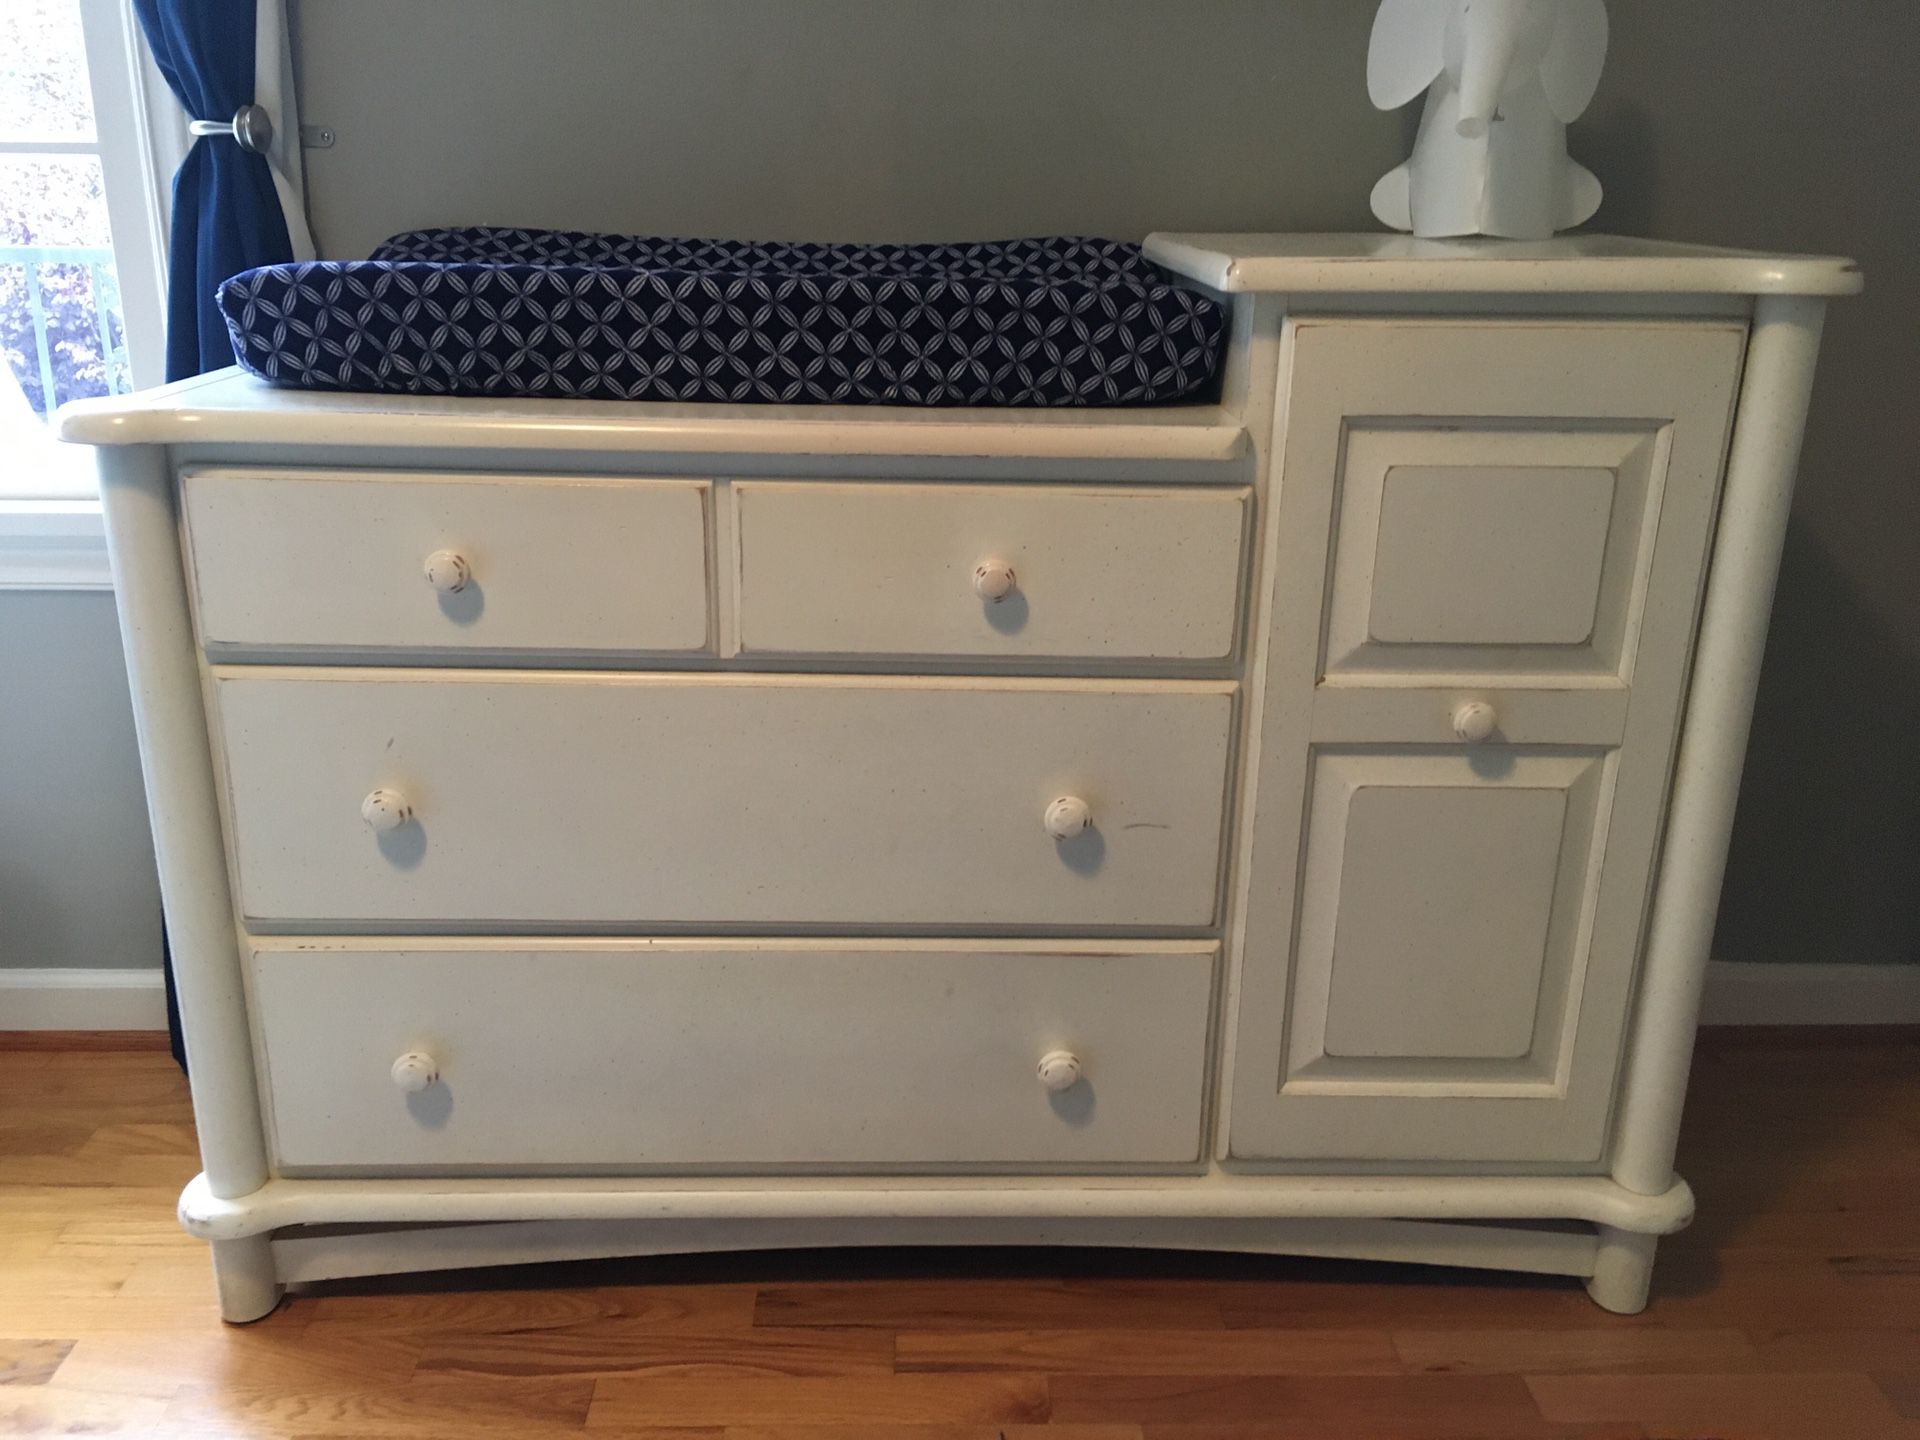 Changing table and dresser